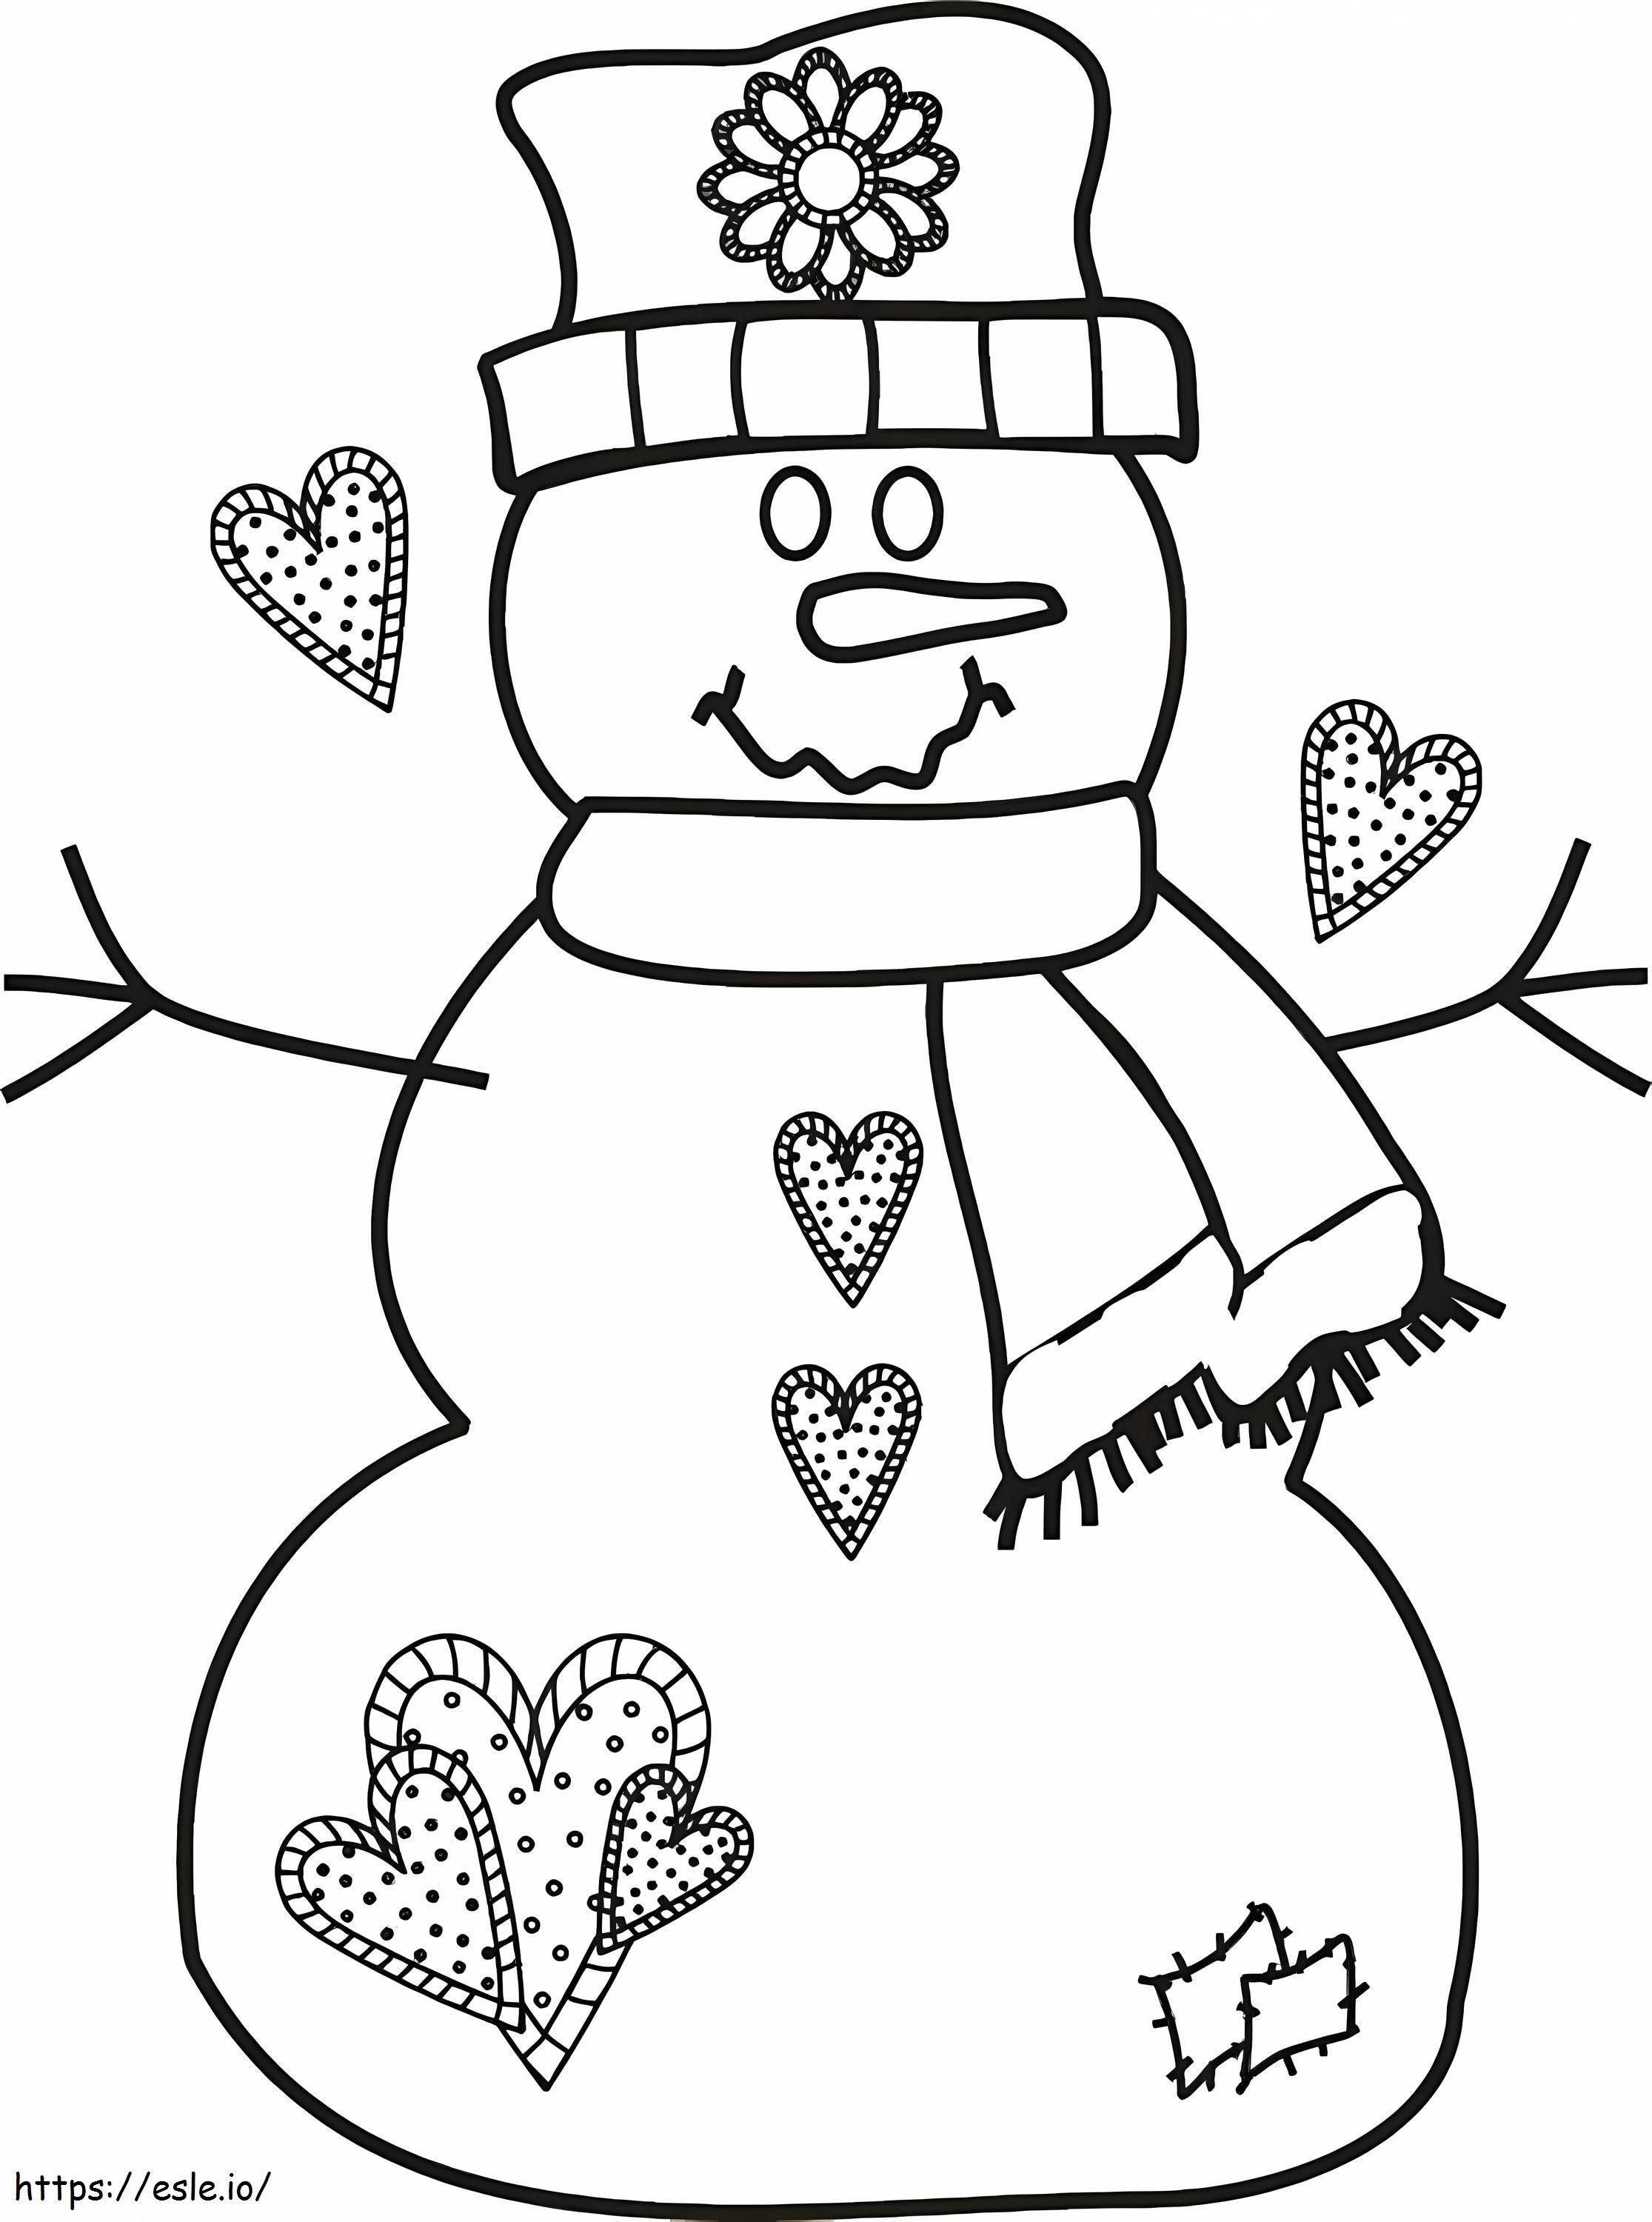 Snowman In Love coloring page